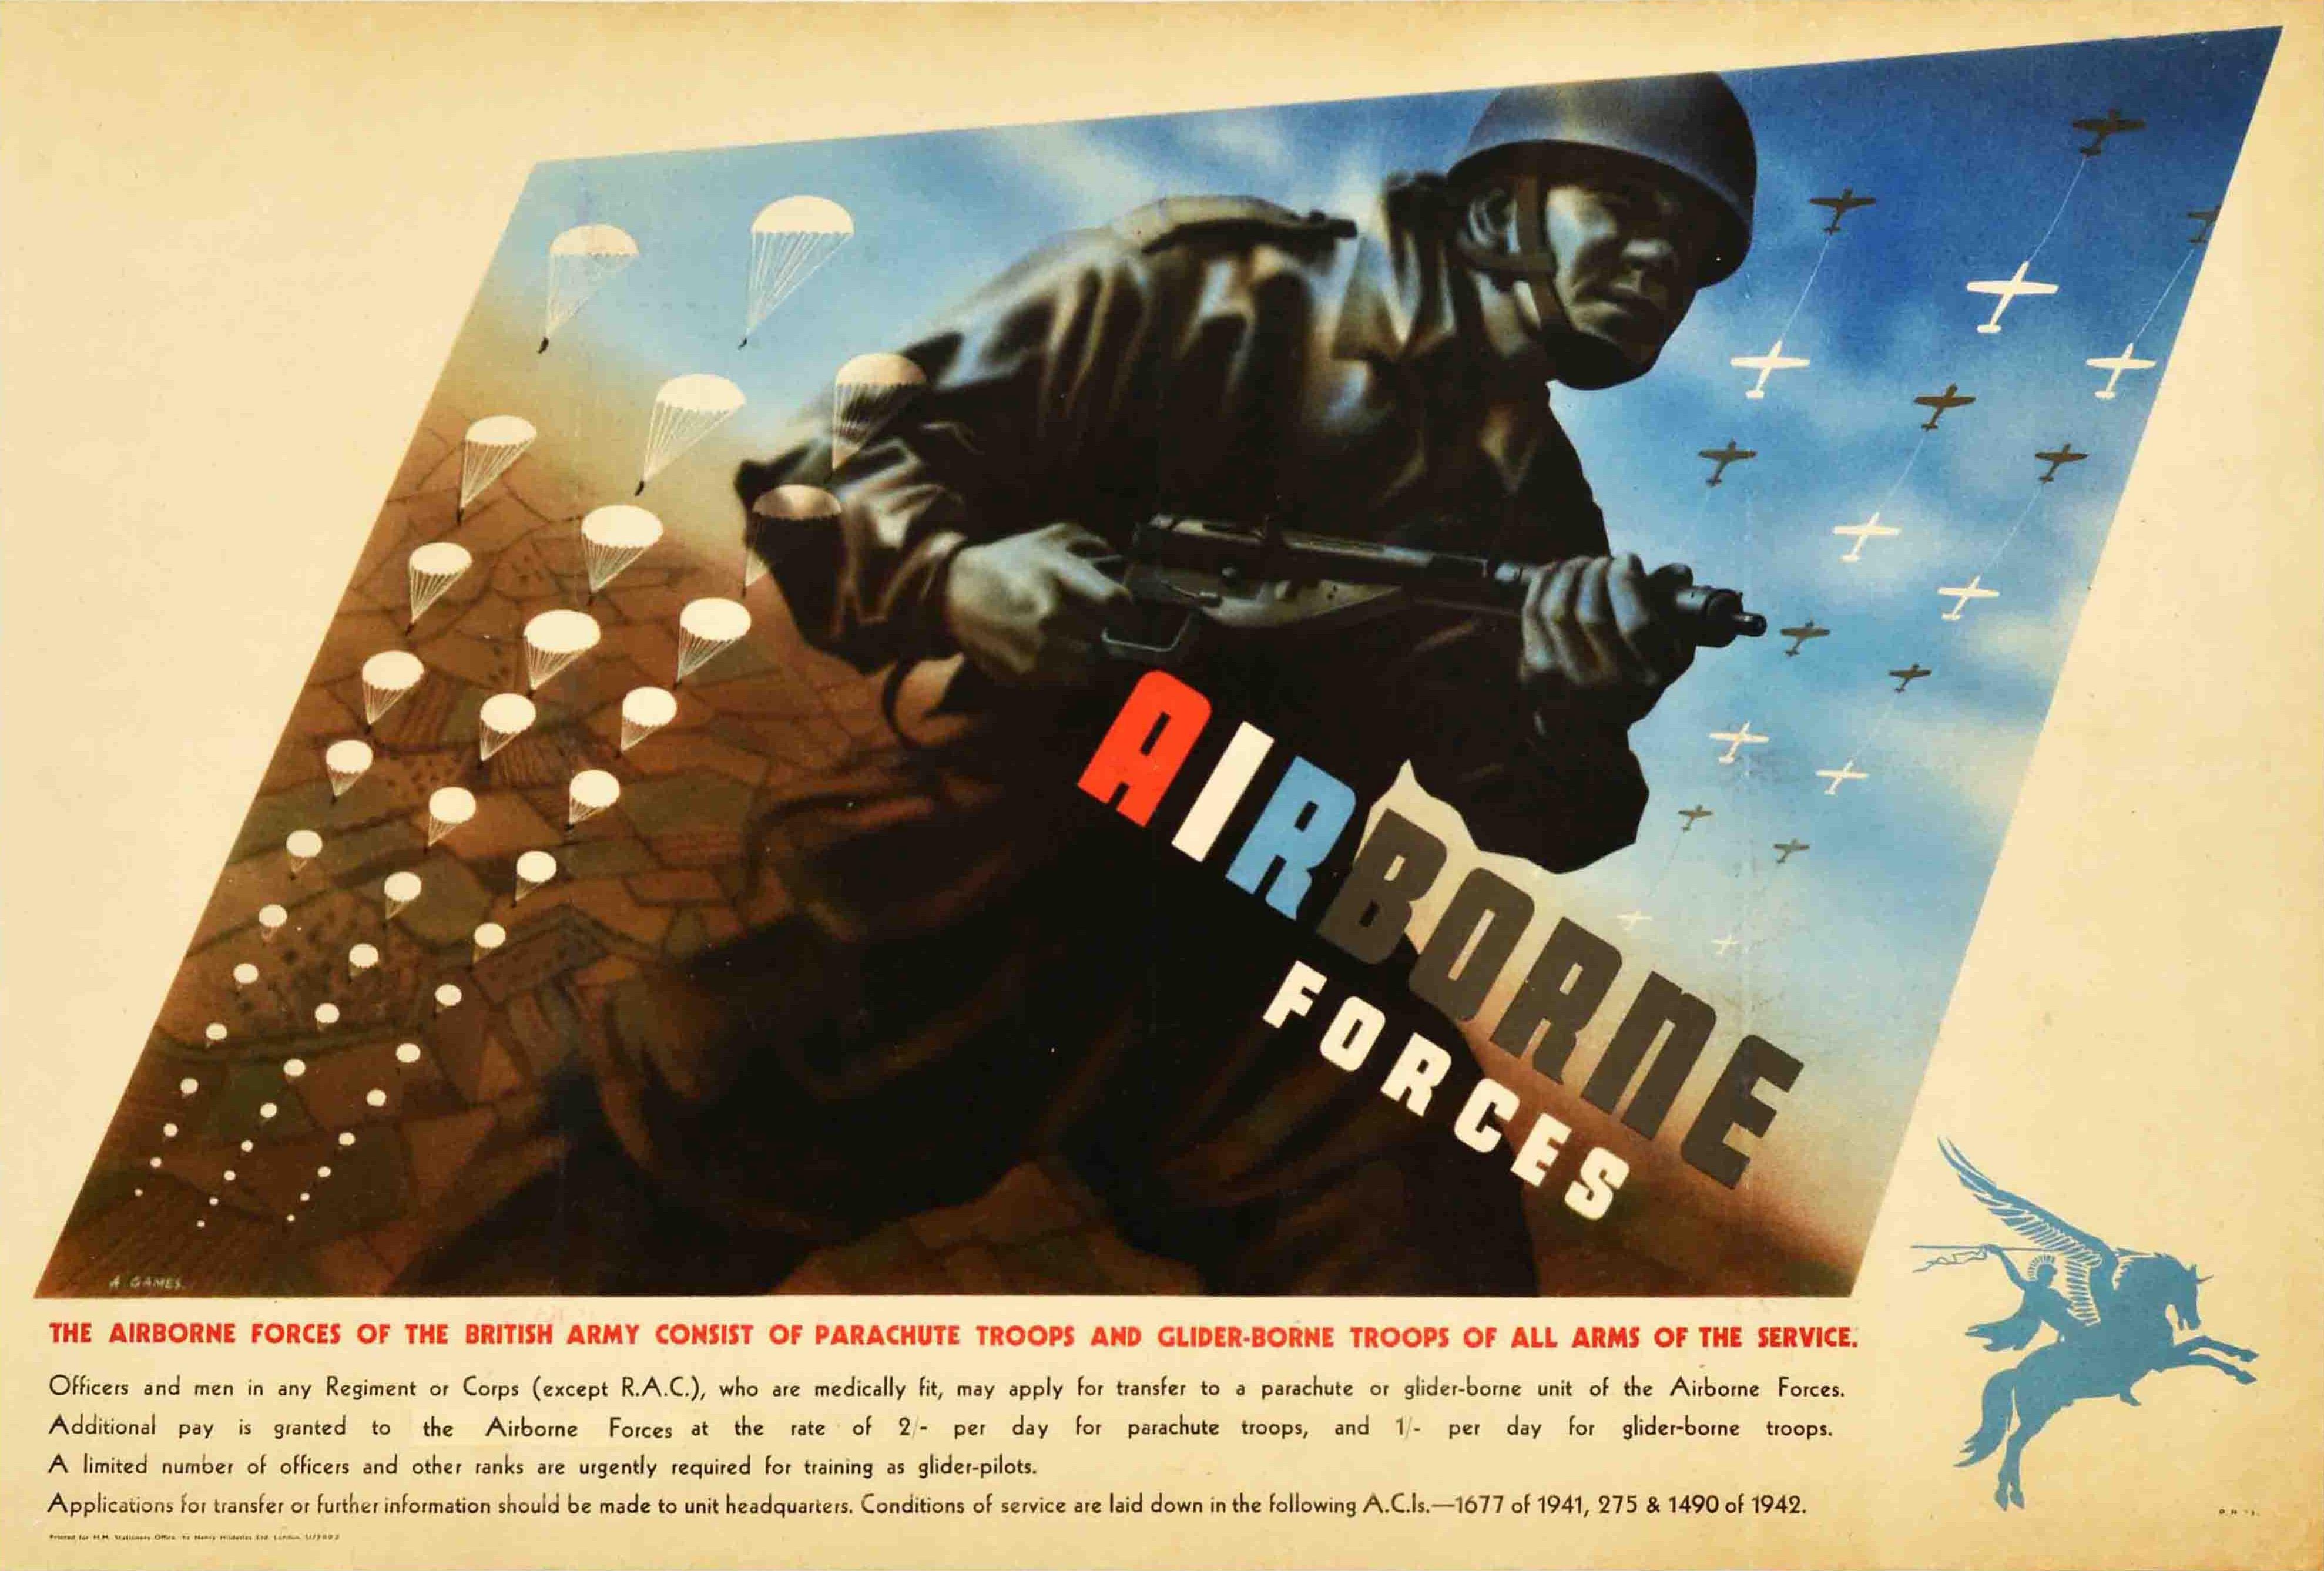 Abram Games Print - Original Vintage WWII Recruitment Poster Airborne Forces British Army Troops